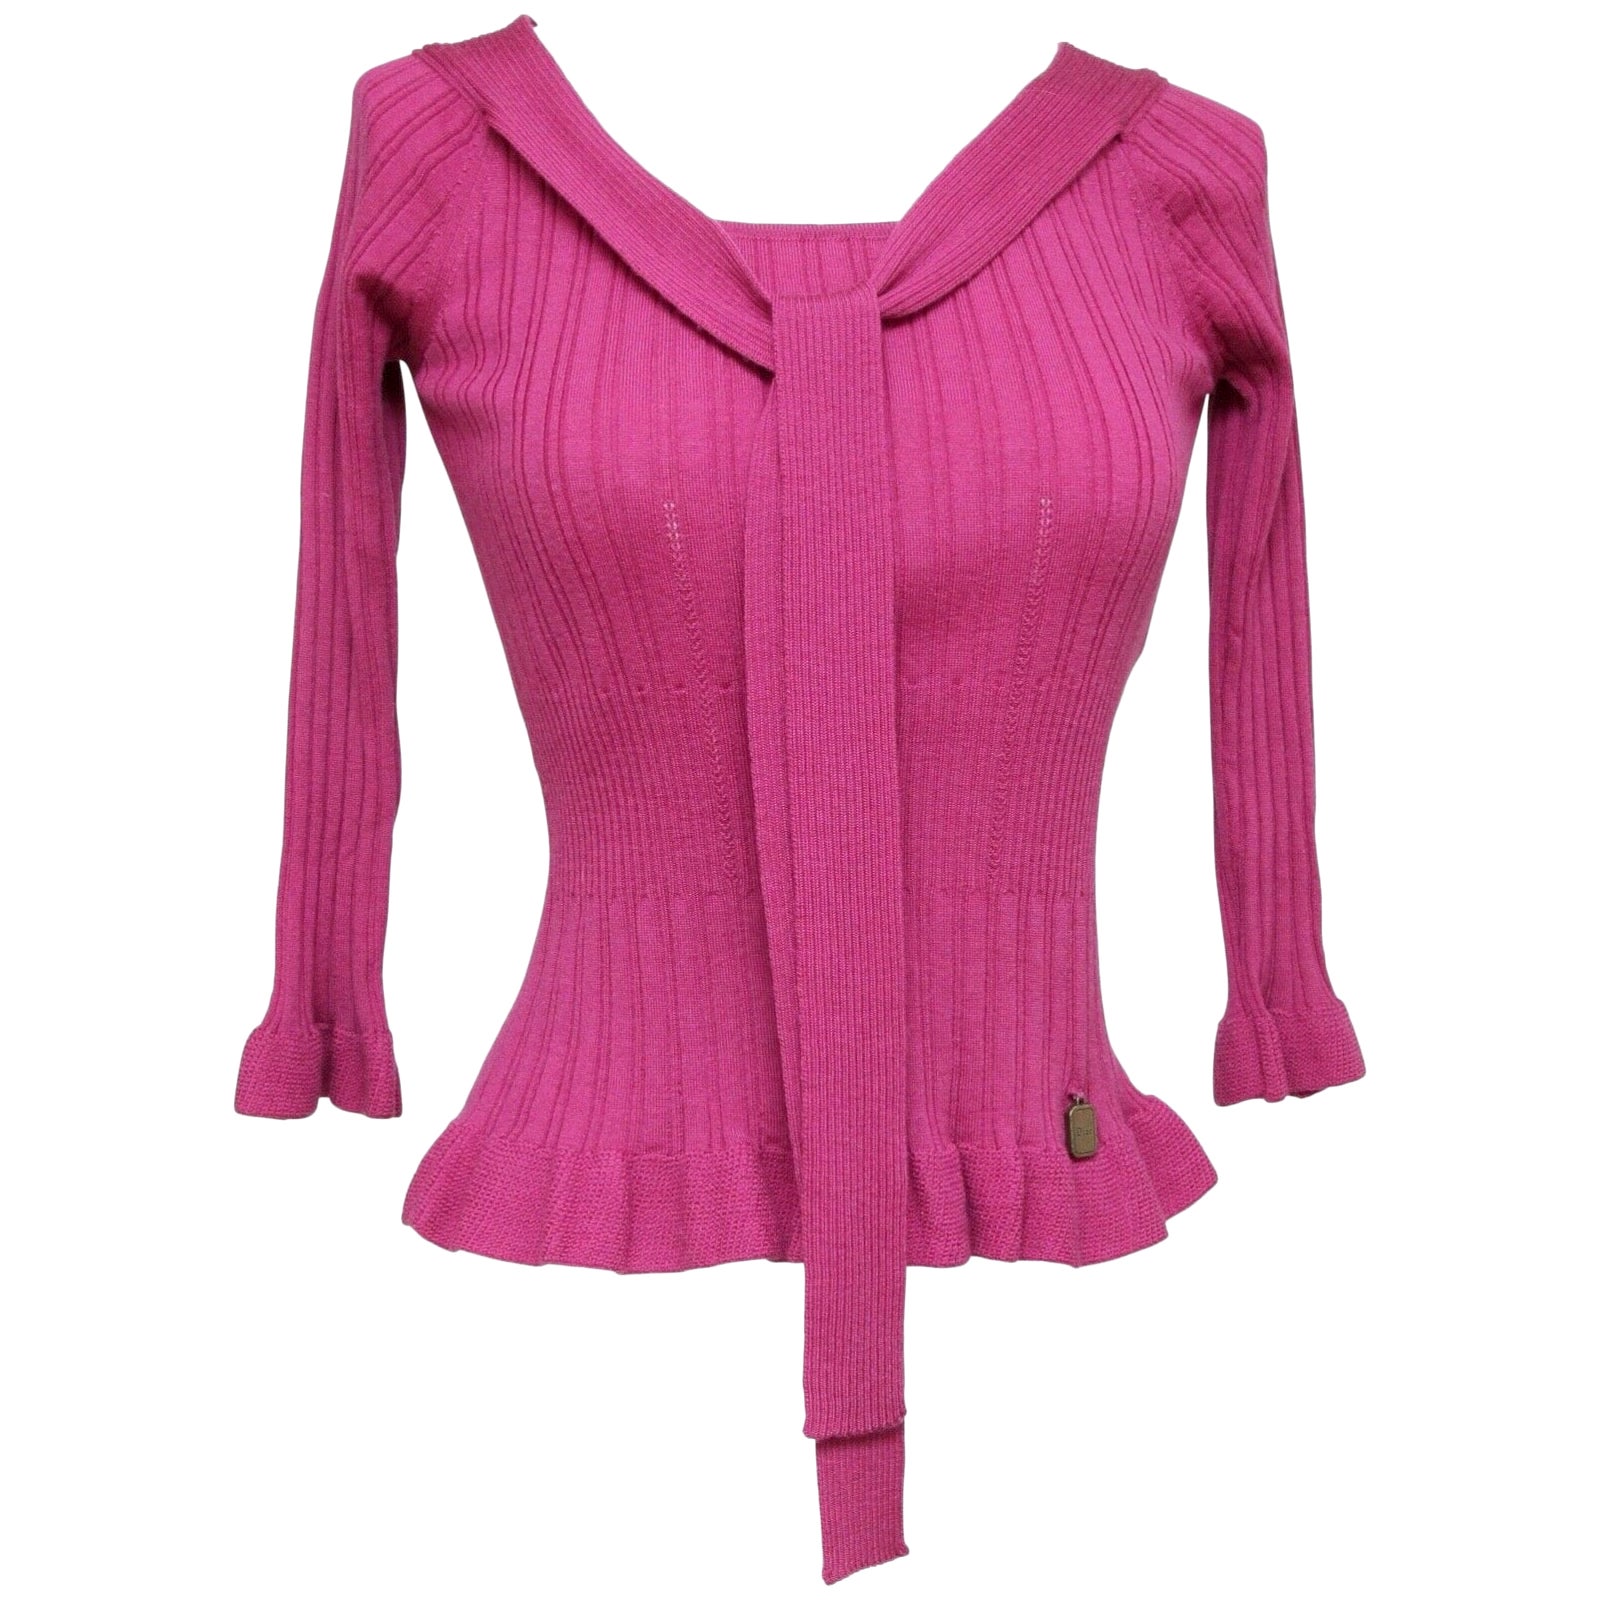 CHRISTIAN DIOR Sweater Knit Top Magenta Scoop Neck Tie 3/4 Sleeve Sz 36 4 For Sale